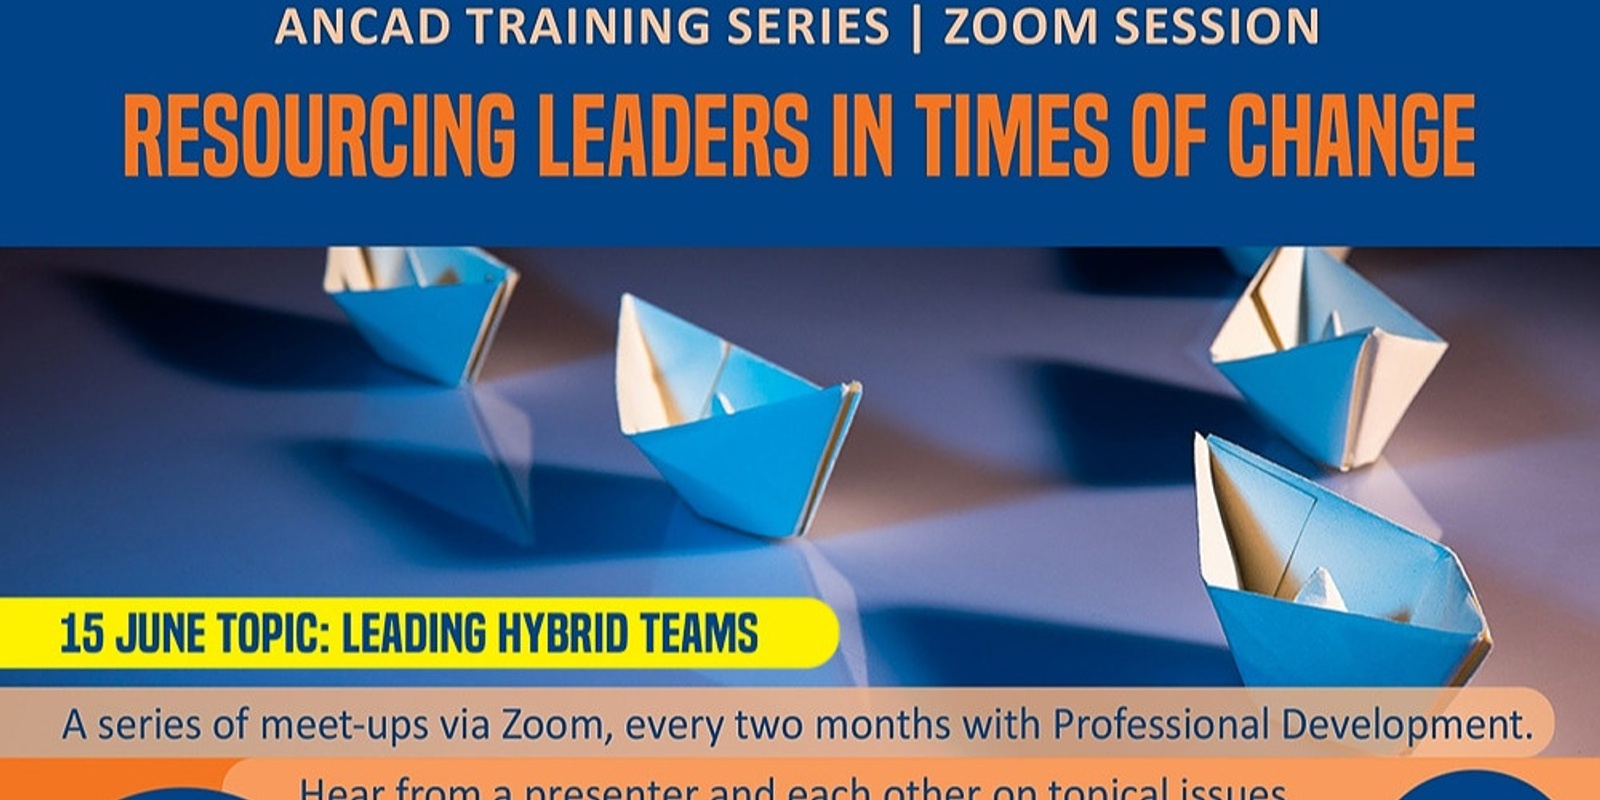 Resourcing Leaders in Times of Change TOPIC: Leading hybrid teams - Working together apart